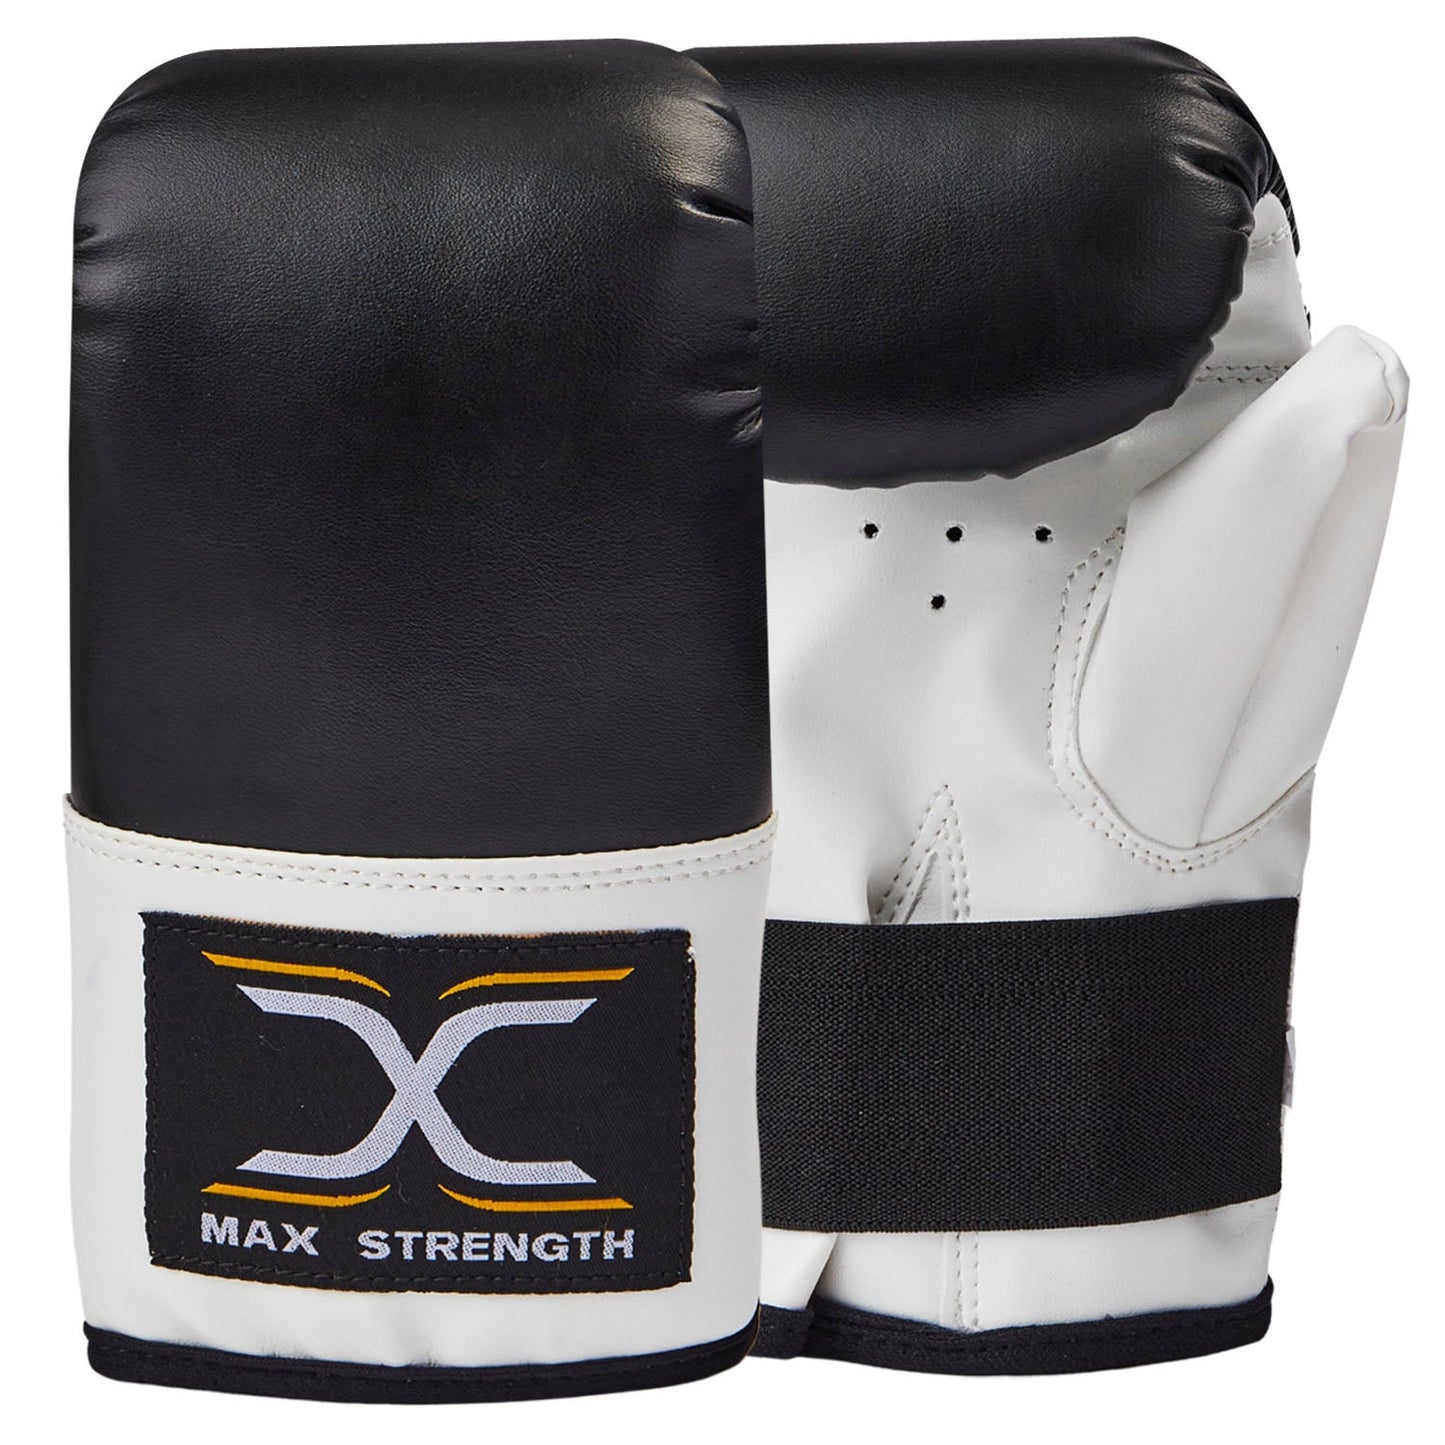 X MAXSTRENGTH Punch Bag Mitts Best Heavy Bag Gloves For Boxing Punching Training Black/White